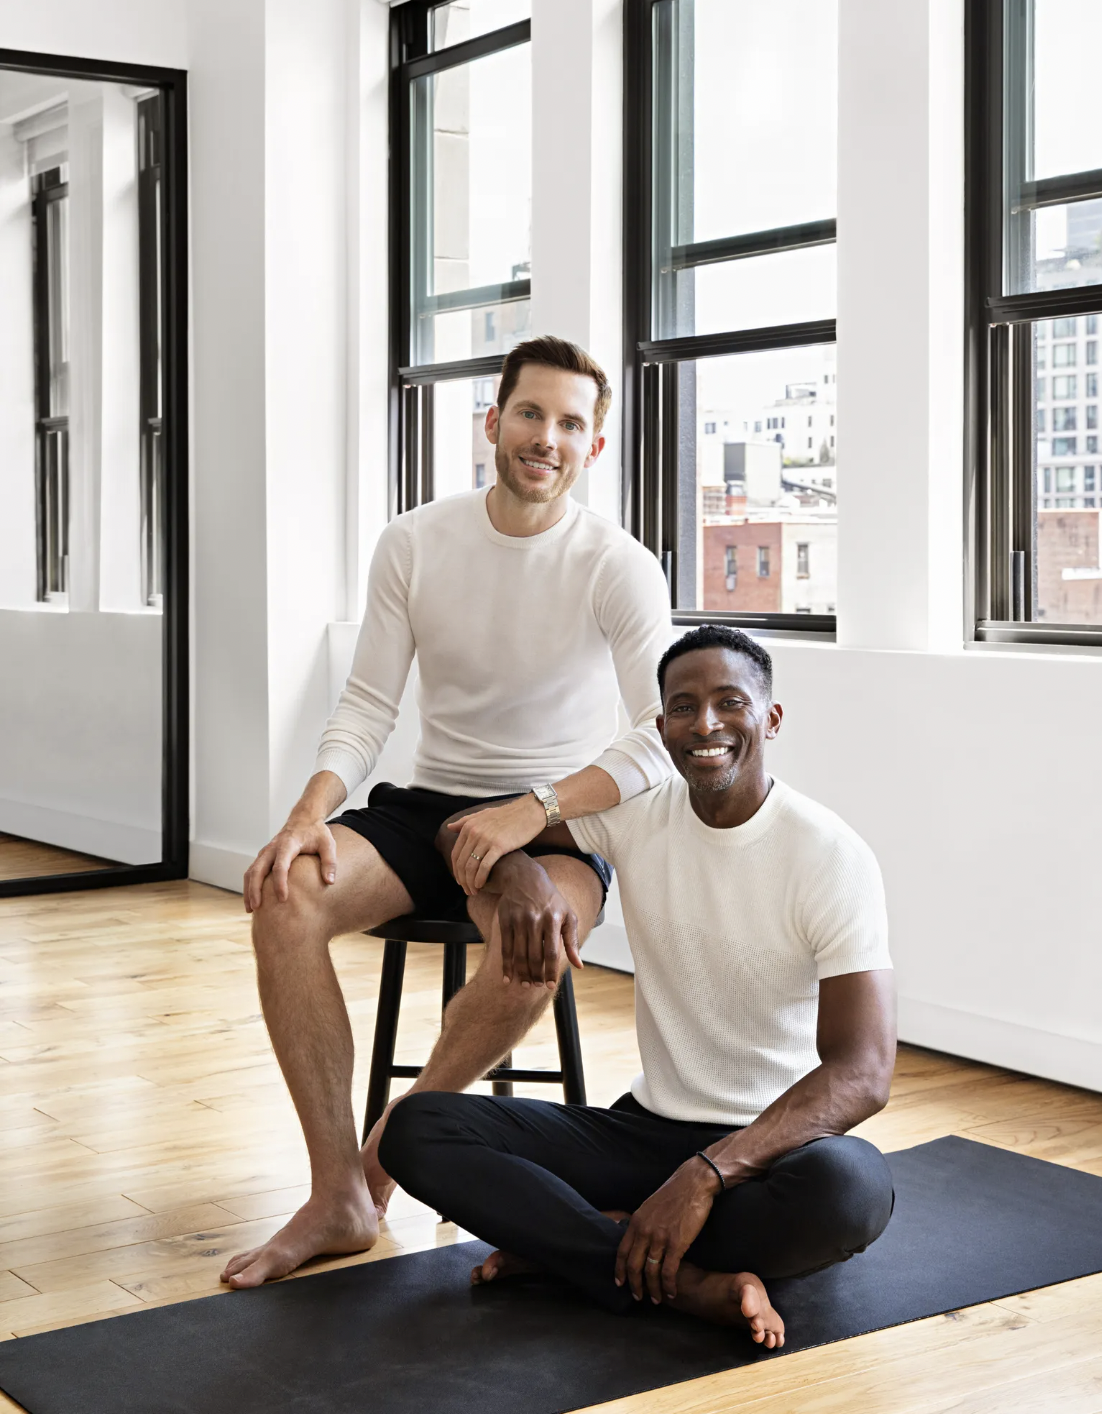 There’s Now a Wellness Network for the Overworked Designer (AD PRO)